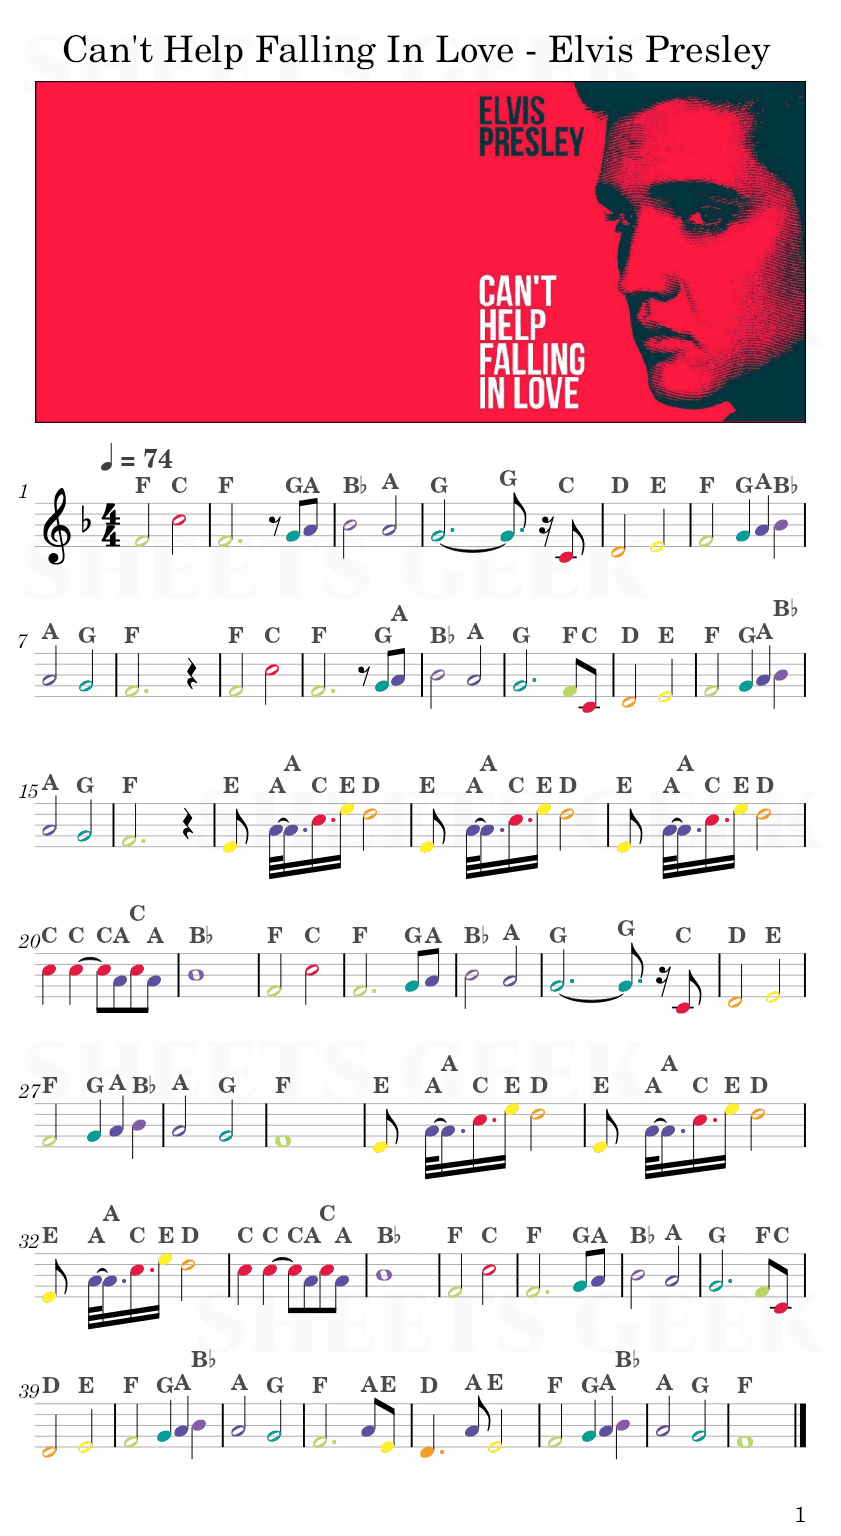 Can't Help Falling In Love - Elvis Presley Easy Sheet Music Free for piano, keyboard, flute, violin, sax, cello page 1